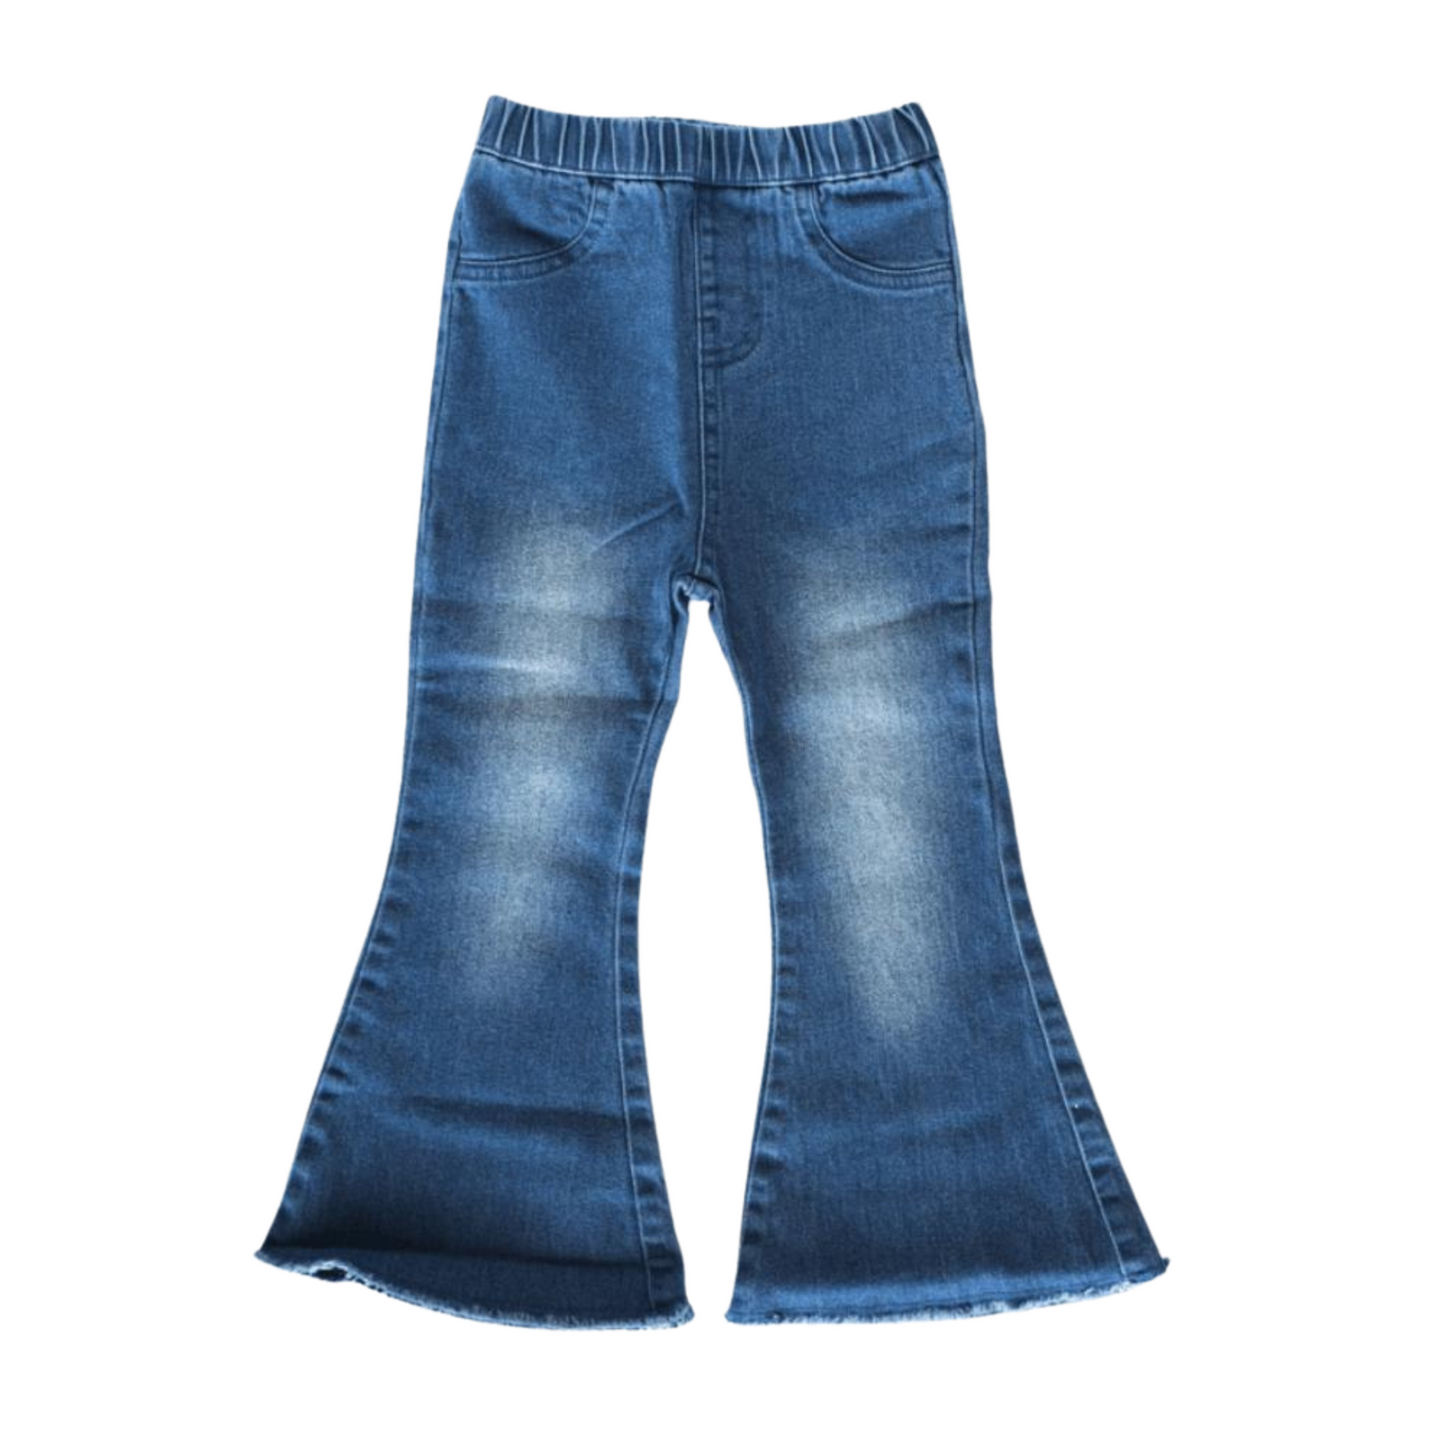 Dark Wash Denim Bell Bottoms. Retro is back, baby! Our classic bell bottoms are a customer favorite and are your new favorite staple! Pair with any top to bring your mini's style to the next level. Elastic waistband for easy pull-on wear. May vary slightly in color due to dyeing process.  75% Cotton, 23% Polyester, 2% Spandex.  Hand Wash.  Women Owned.